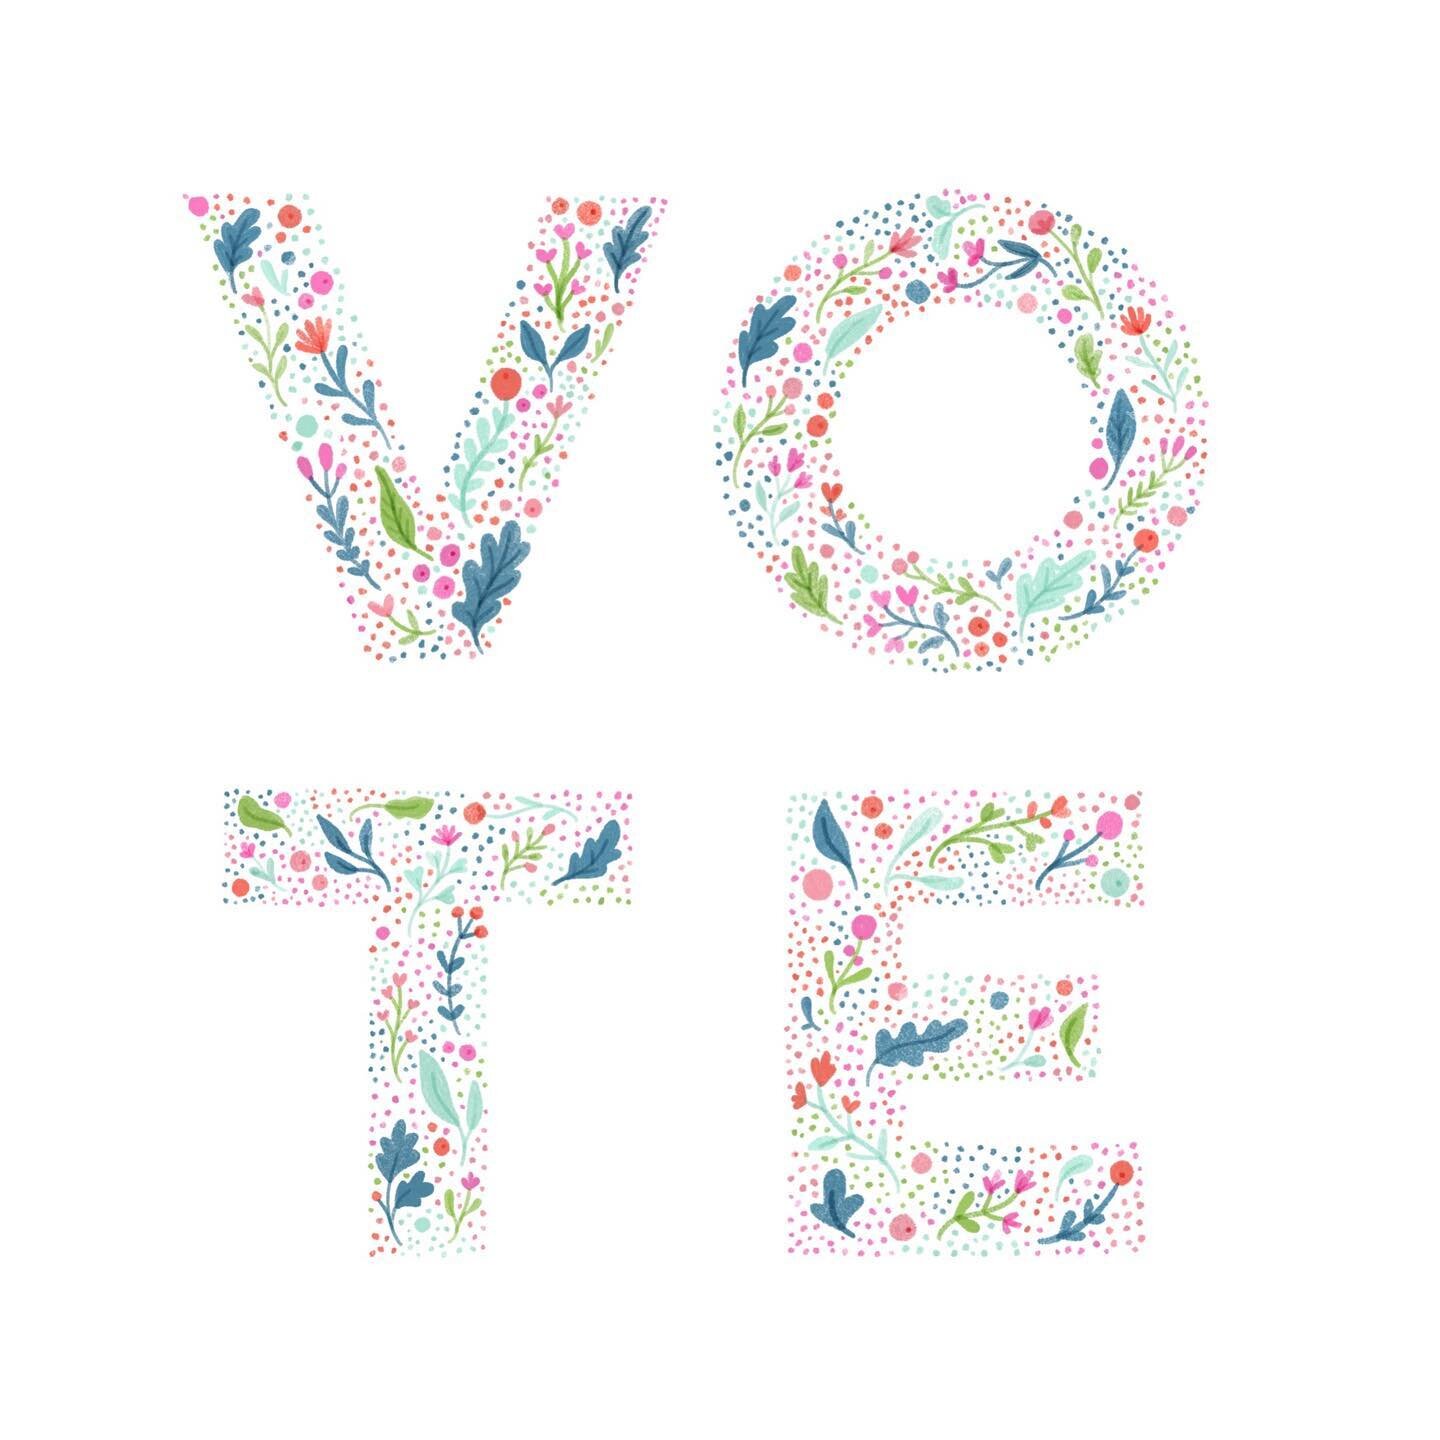 Today is a big day. If you haven&rsquo;t already, I urge you to make your voice heard and cast a vote. This election is likely the most important of our lives. For everyone who has been affected by the last 4 years of intolerance and division, I stan